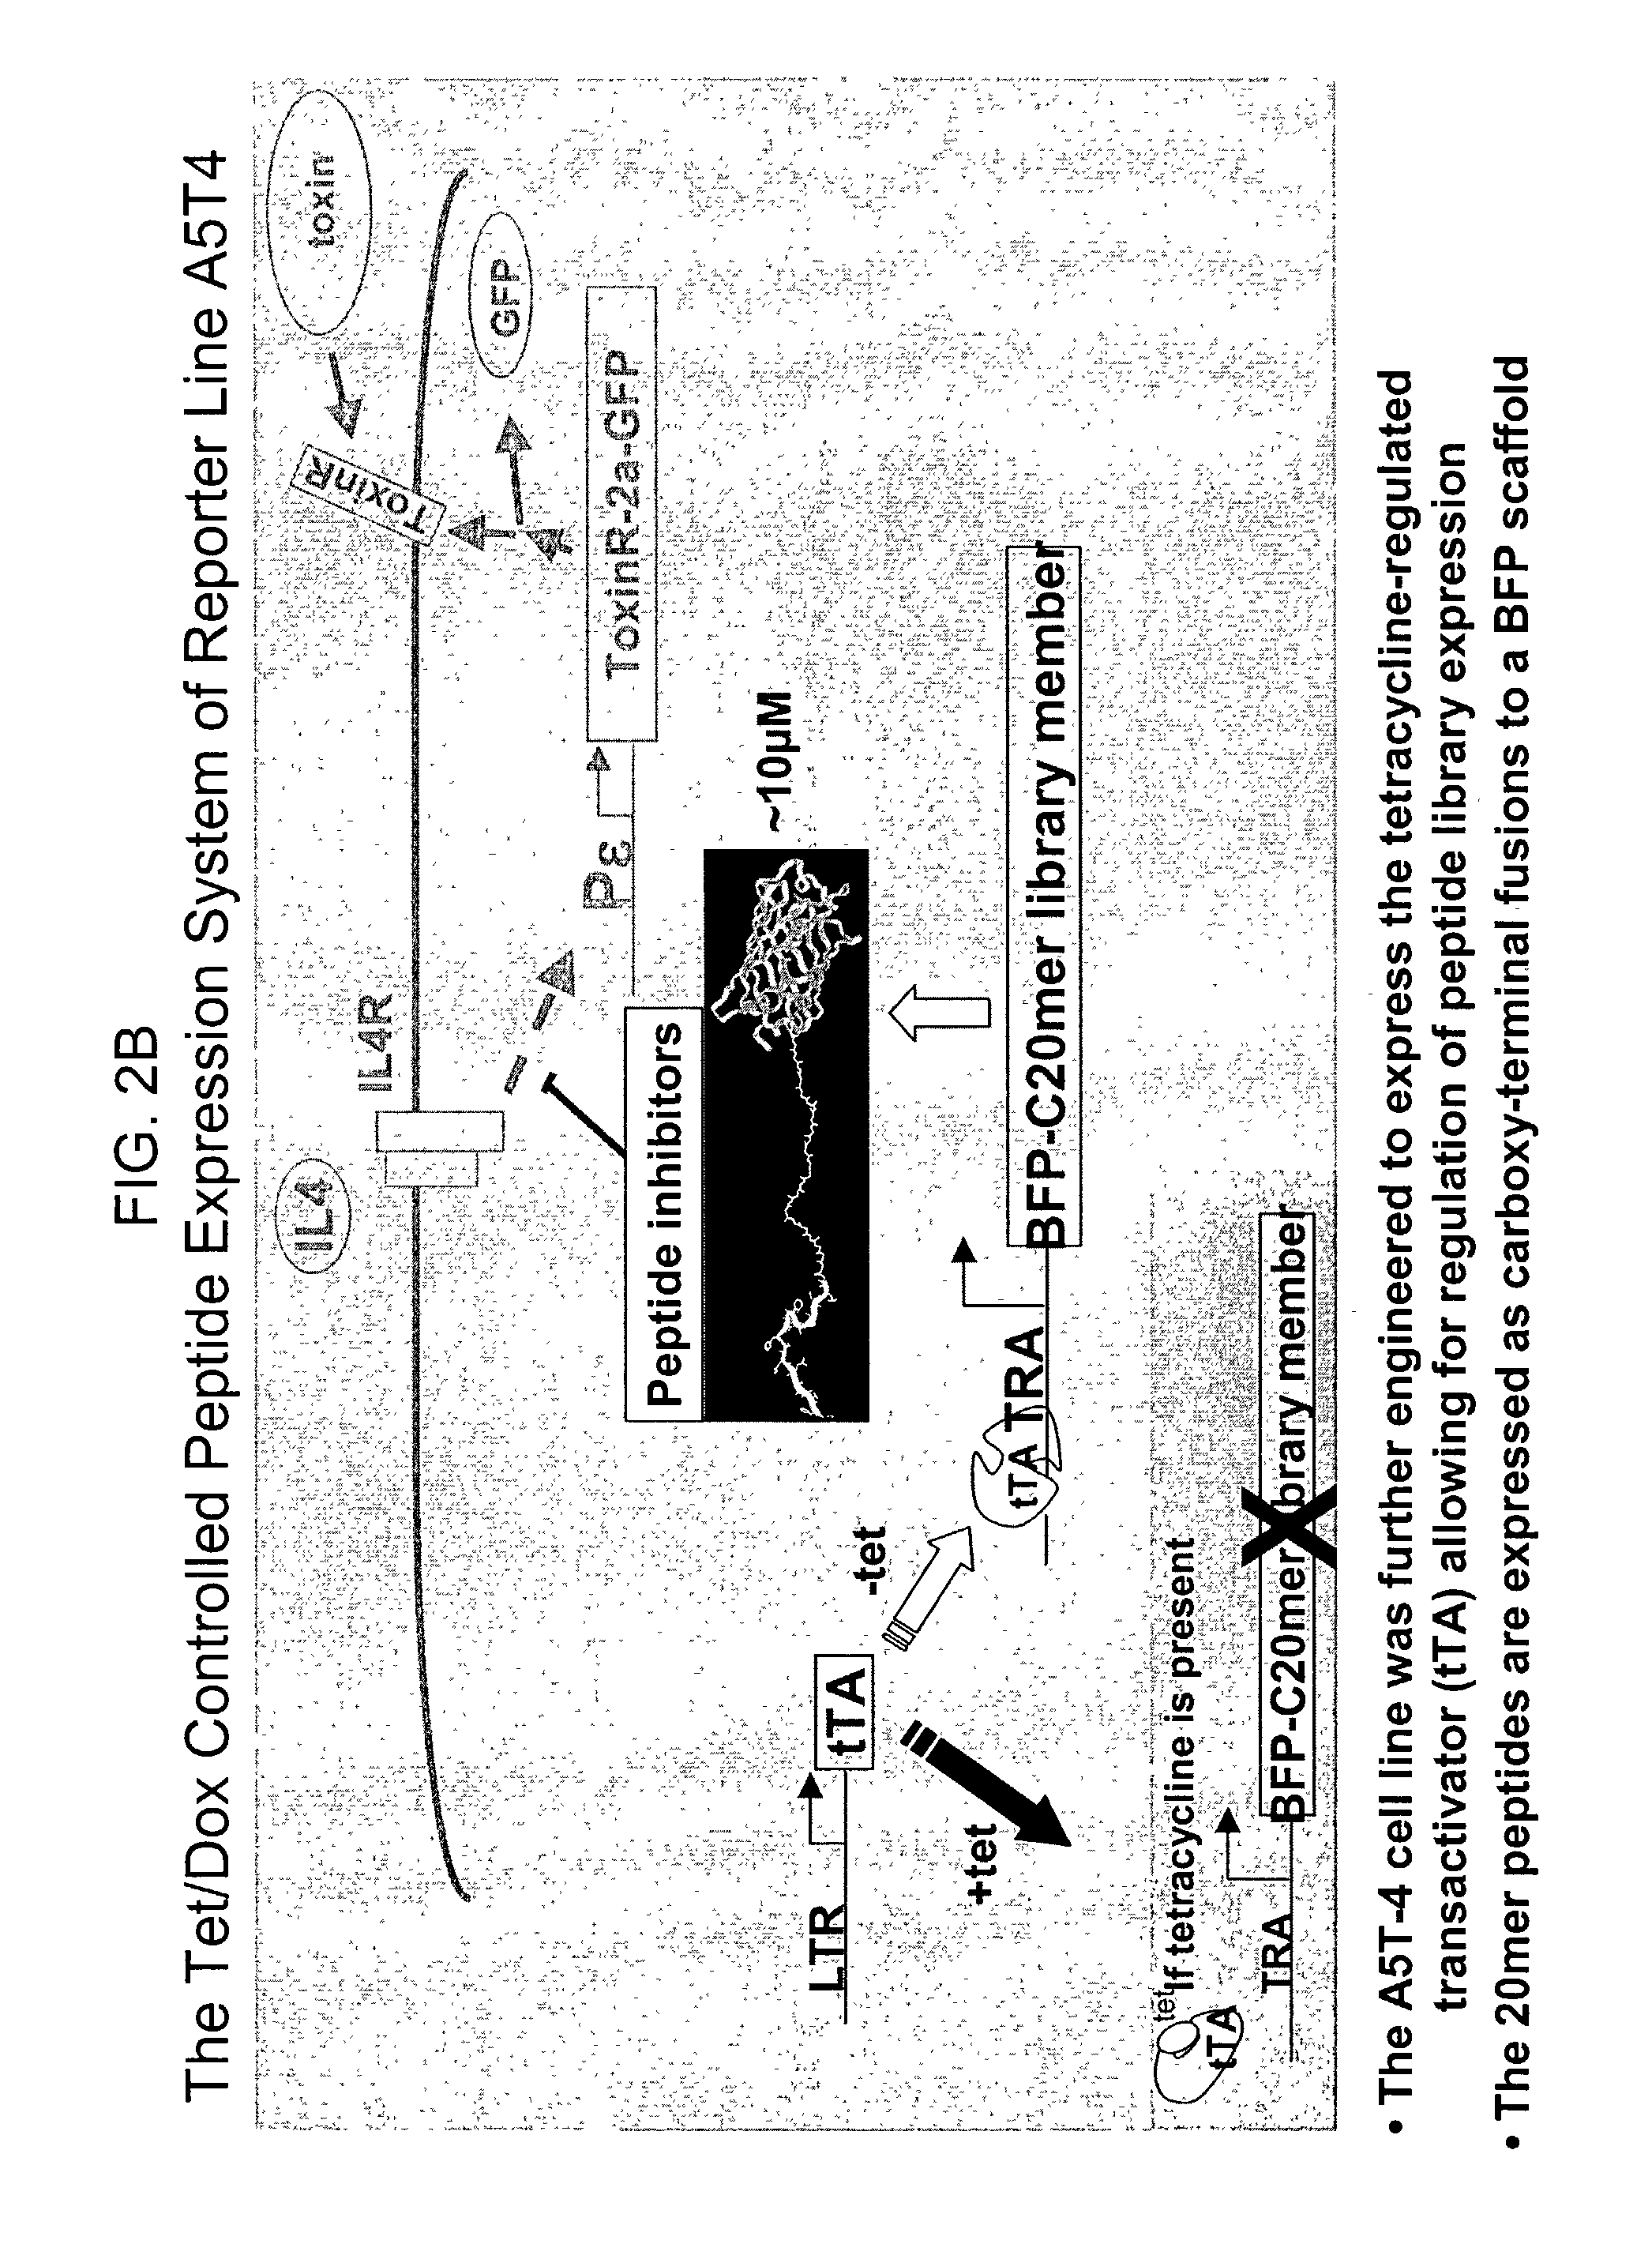 Methods of identifying compounds that modulate IL-4 receptor-mediated IgE synthesis utilizing an adenosine kinase